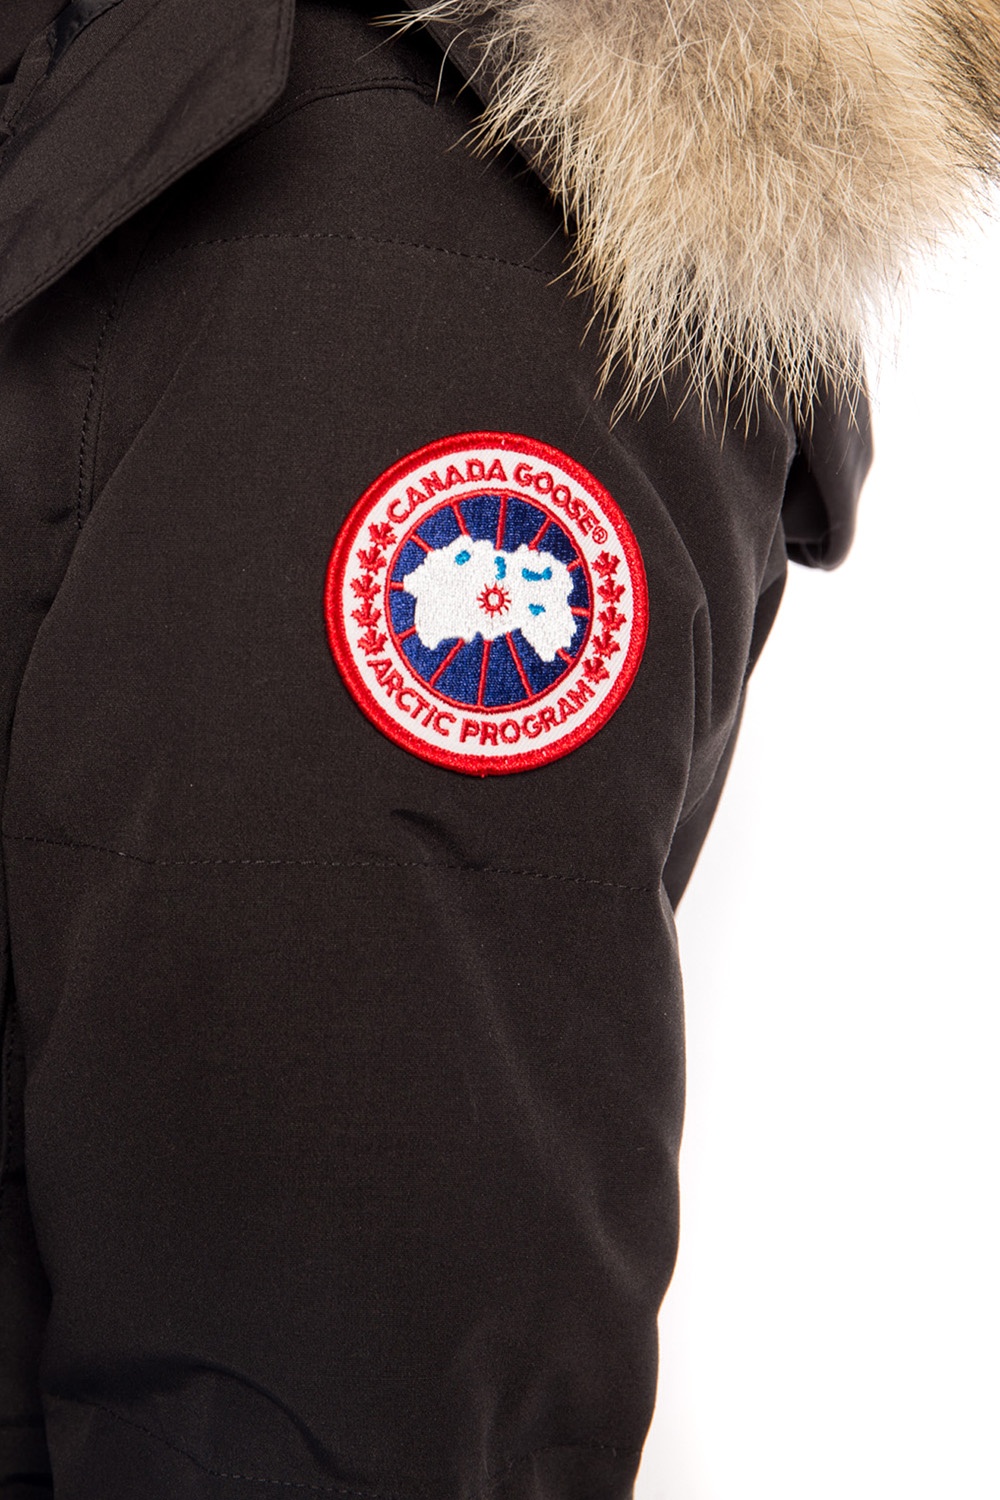 Canada Goose ‘Chelsea’ logo-patched jacket